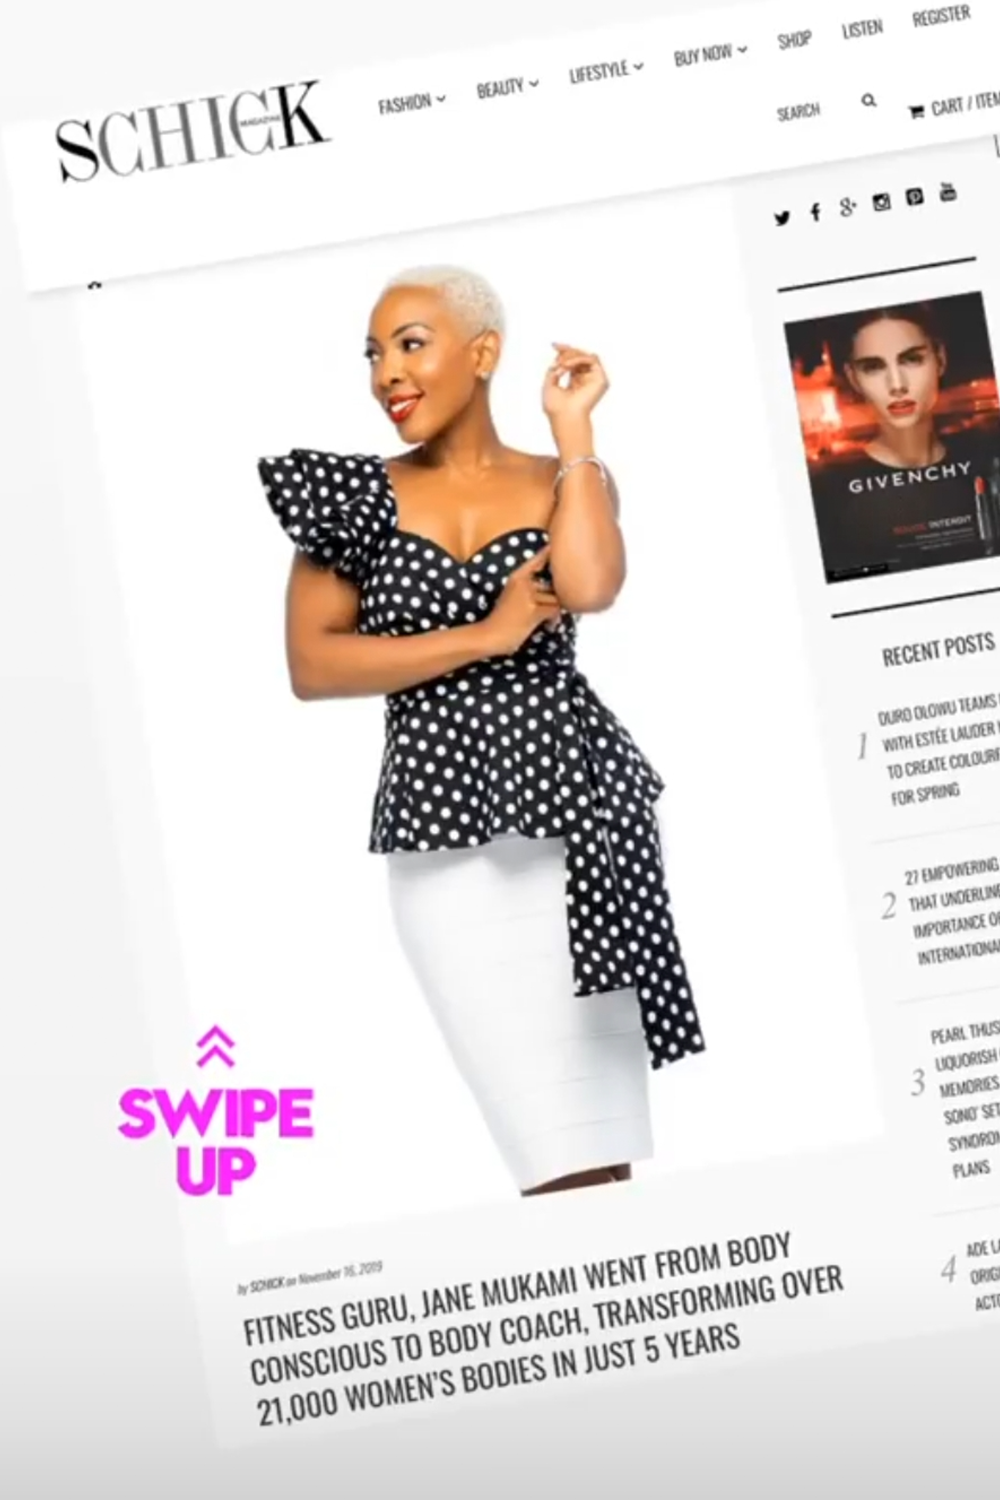 A woman in a polka dot dress is featured on the schick website.